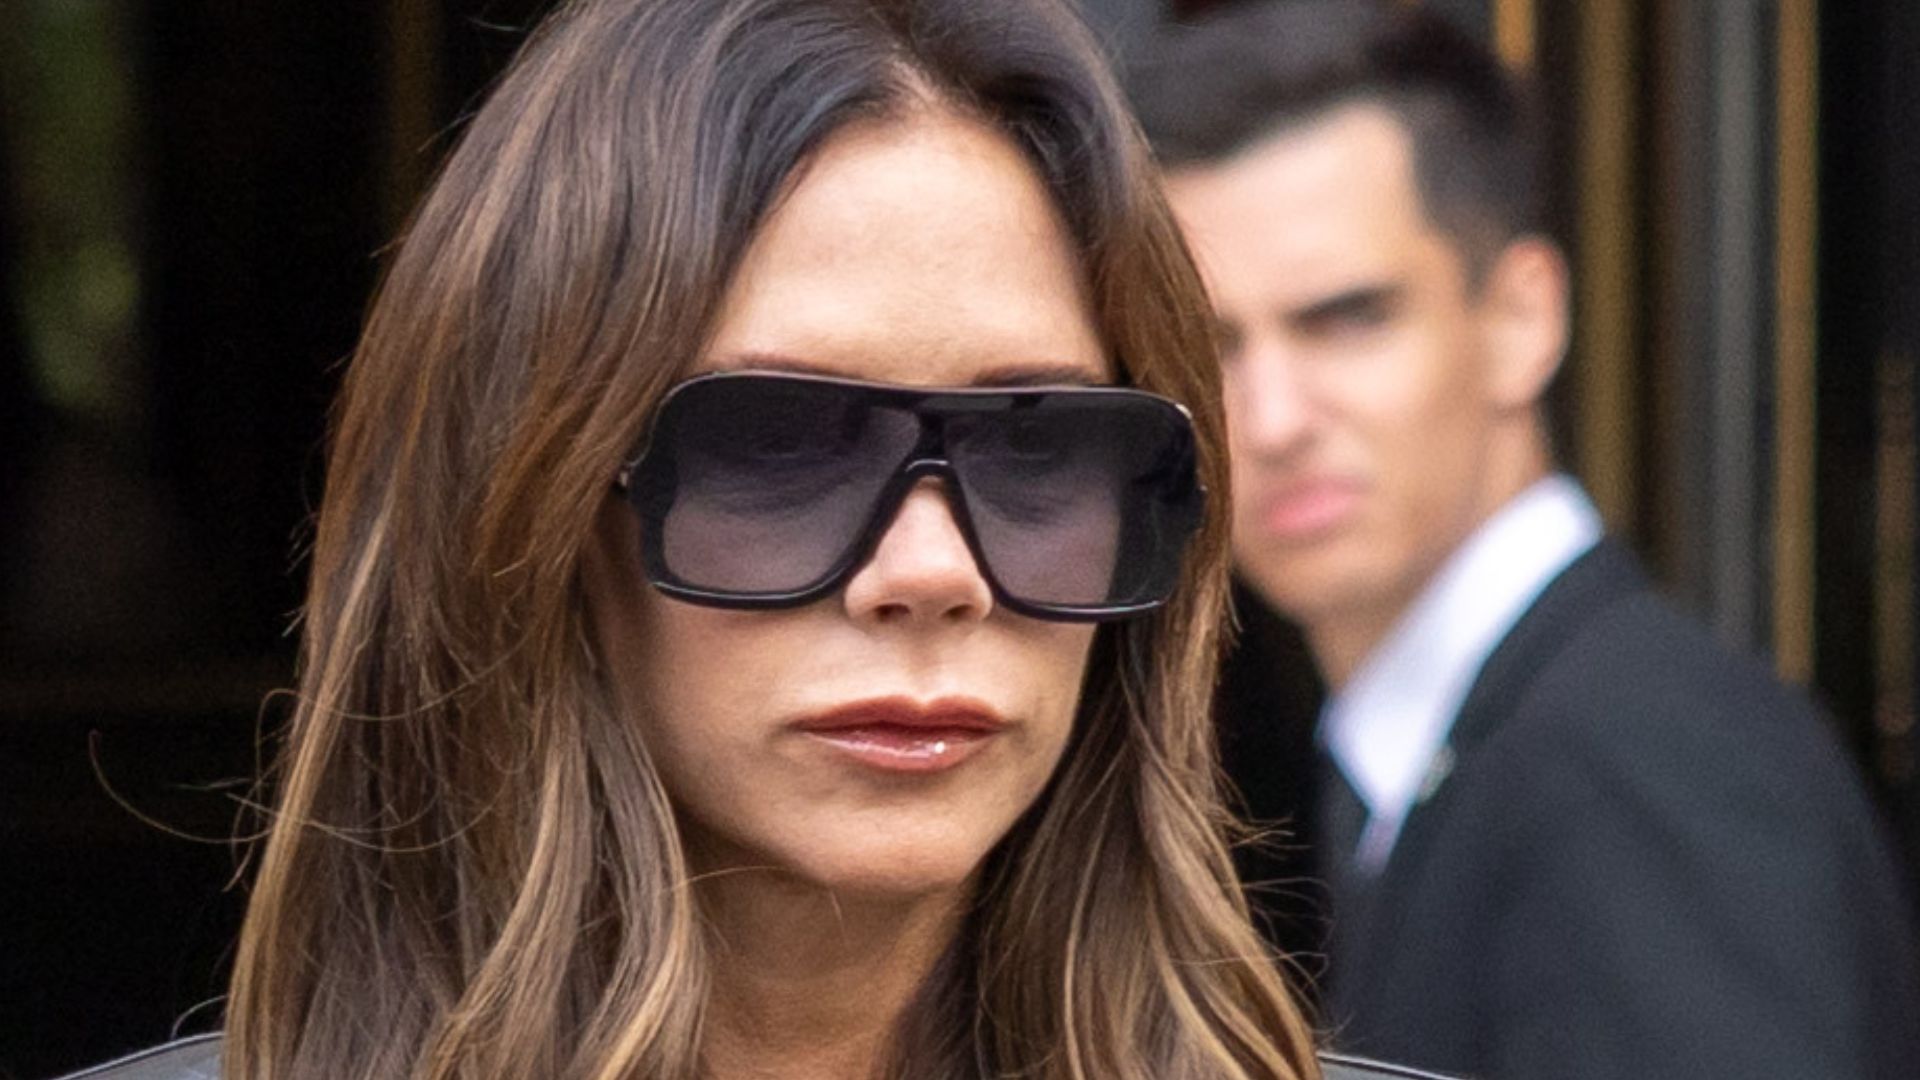 Victoria Beckham joined the no-trousers trend in Paris | Woman & Home